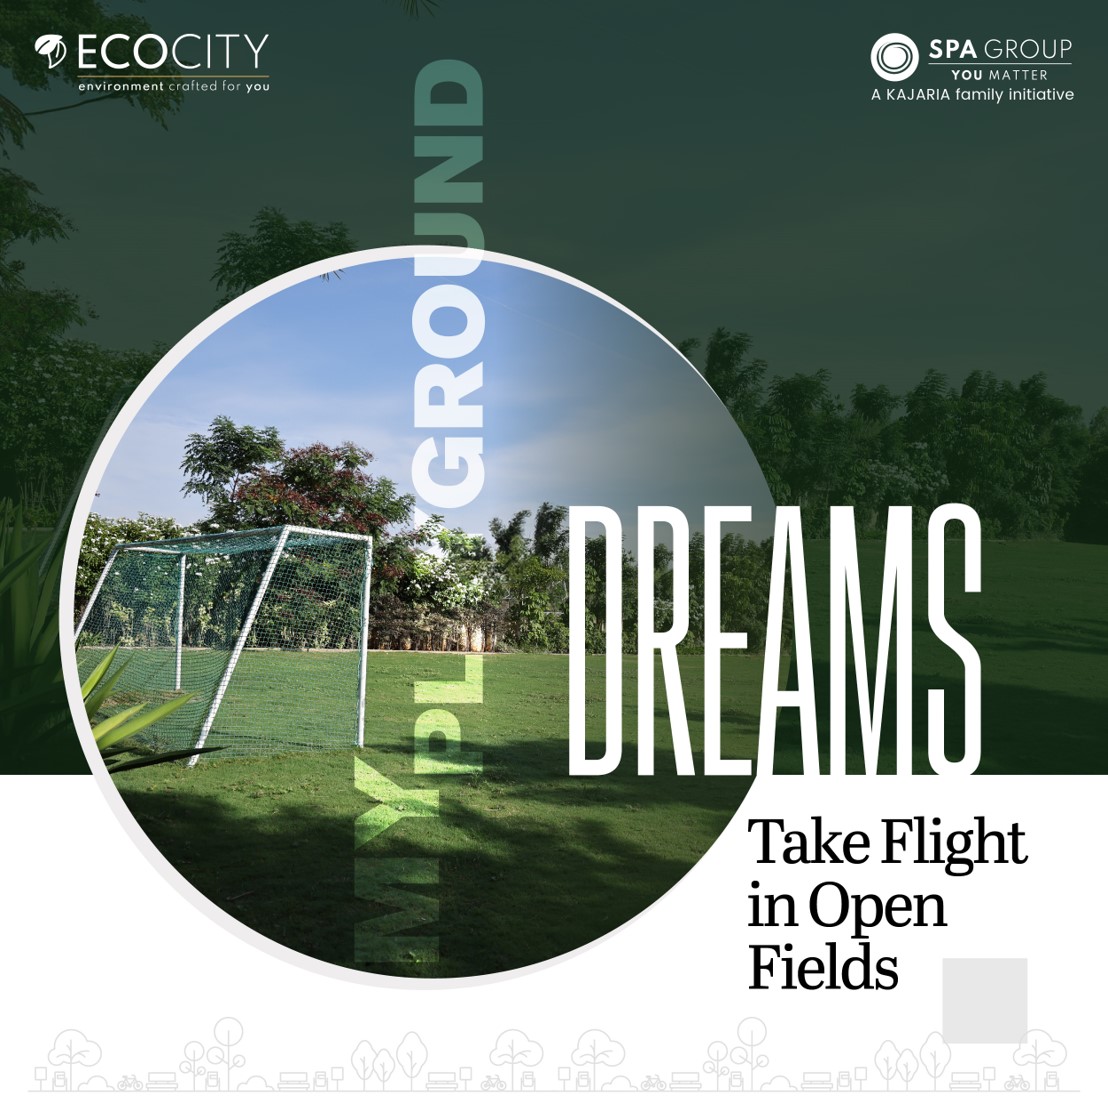 '#MyPlayground' is where the soul finds its wings, and the spirit of play knows no bounds. Craft moments of joy and exploration in this enchanting space, designed for all ages.

To know more visit:  thespagroup.in/ecocity/

#Ecocity #SpaGroup #RawExperiences #Home #Nature